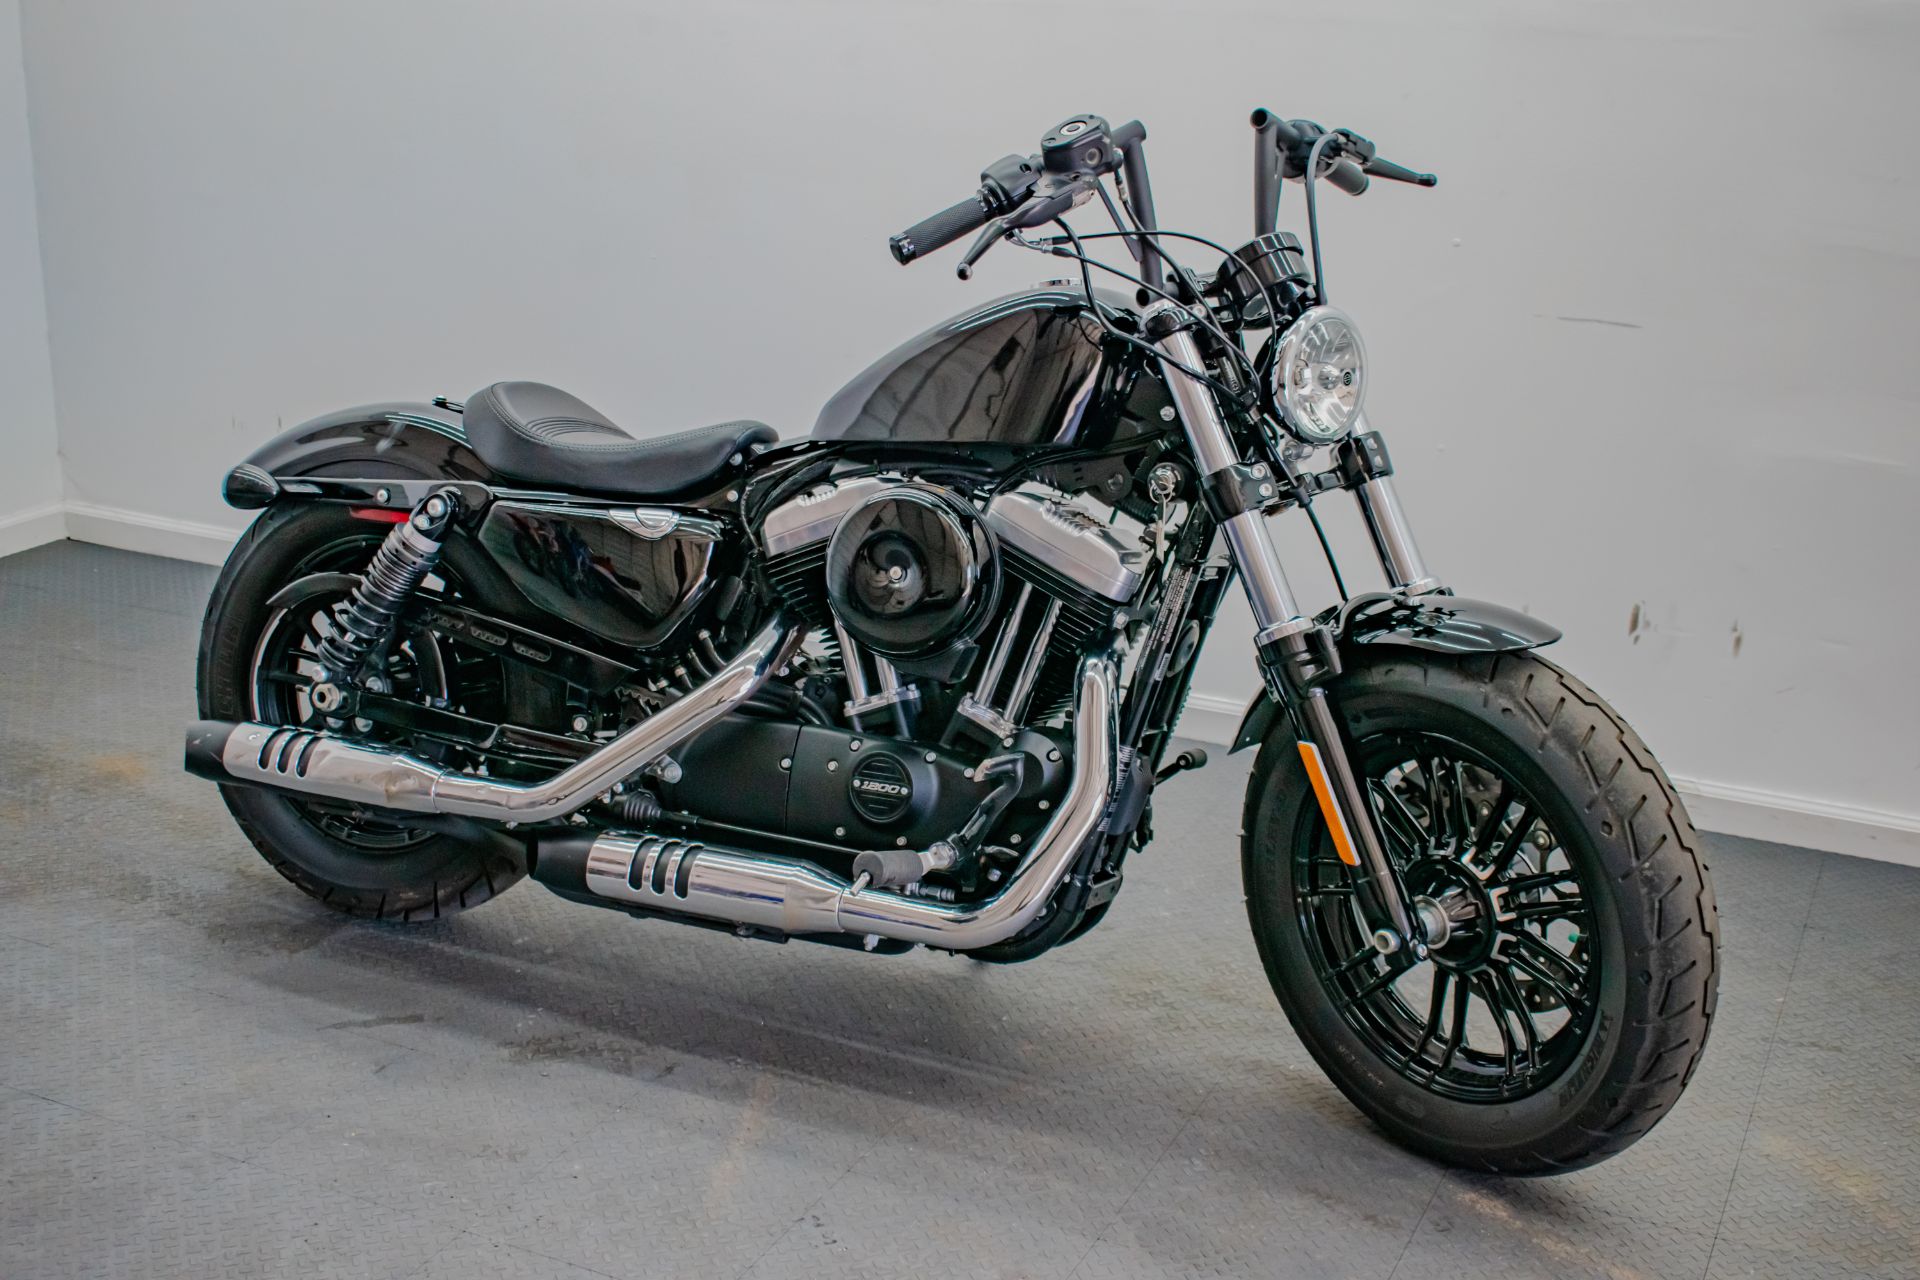 2022 Harley-Davidson Forty-Eight® in Jacksonville, Florida - Photo 6